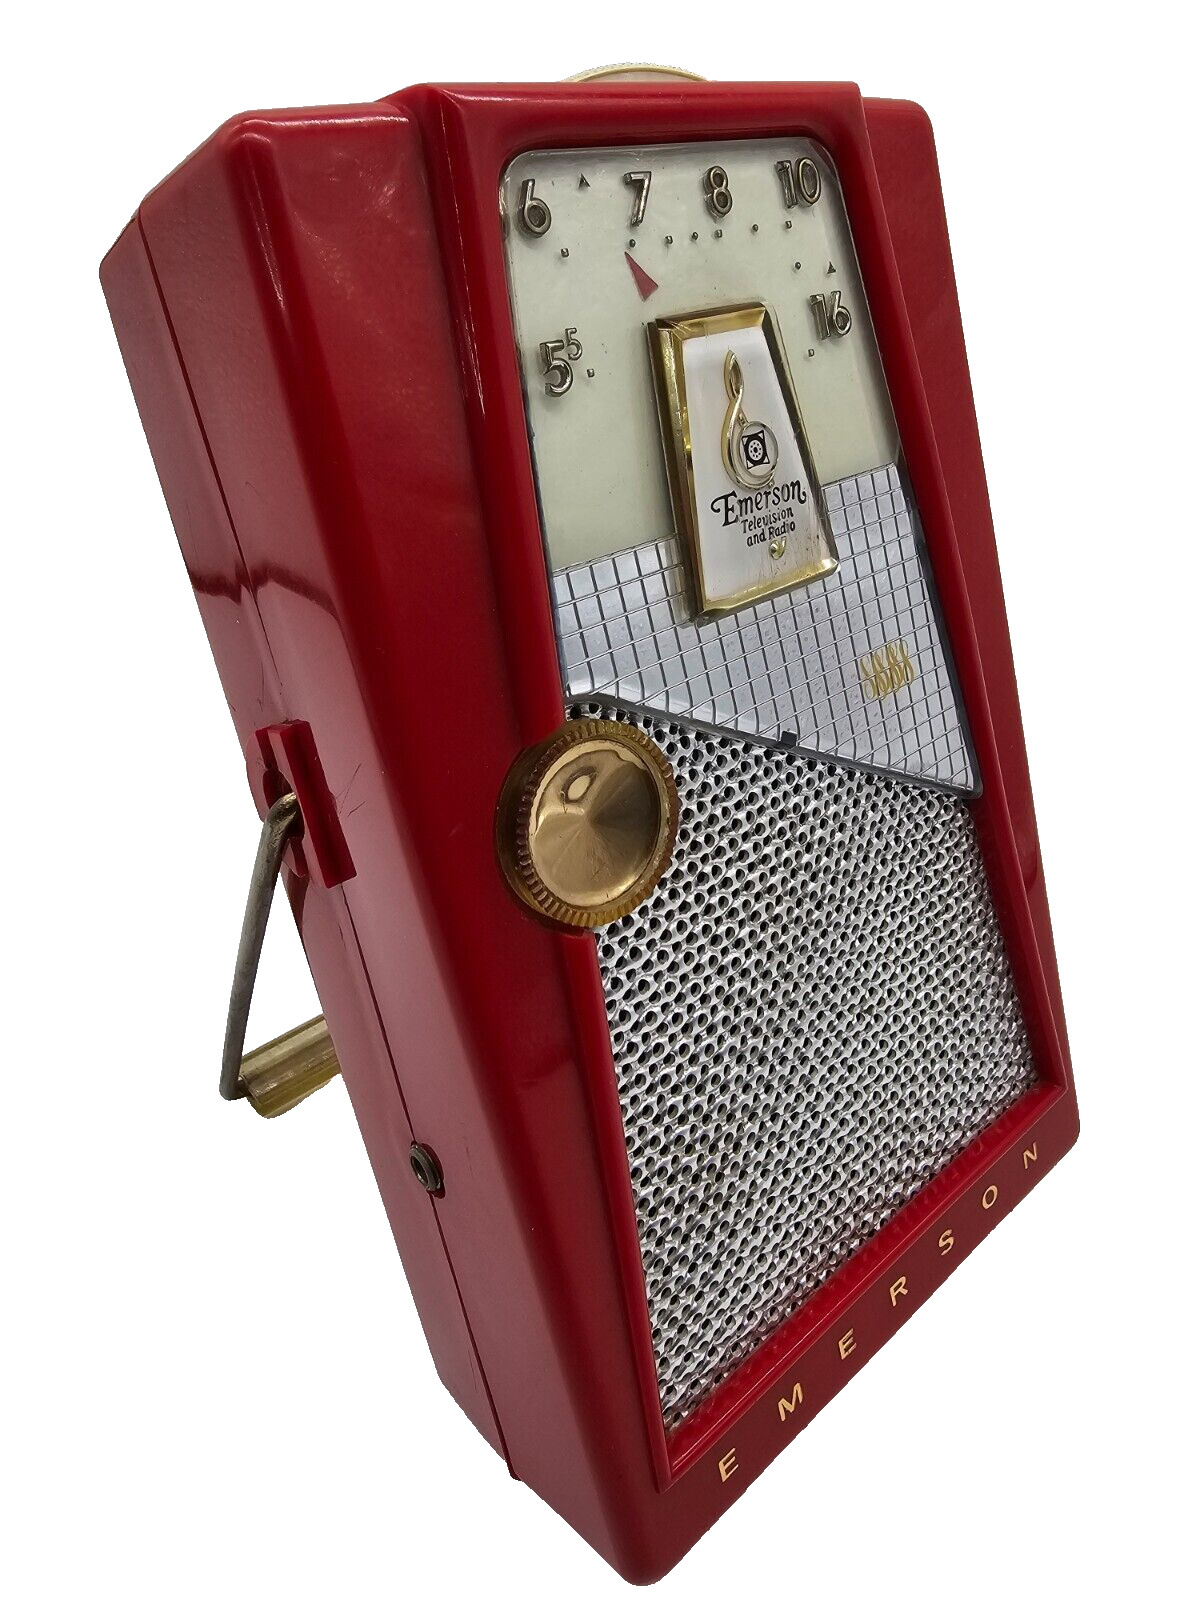 1958/59 Emerson 888 Explorer Radio Pocket Phonograph Corp. Red Rare Sold as is.